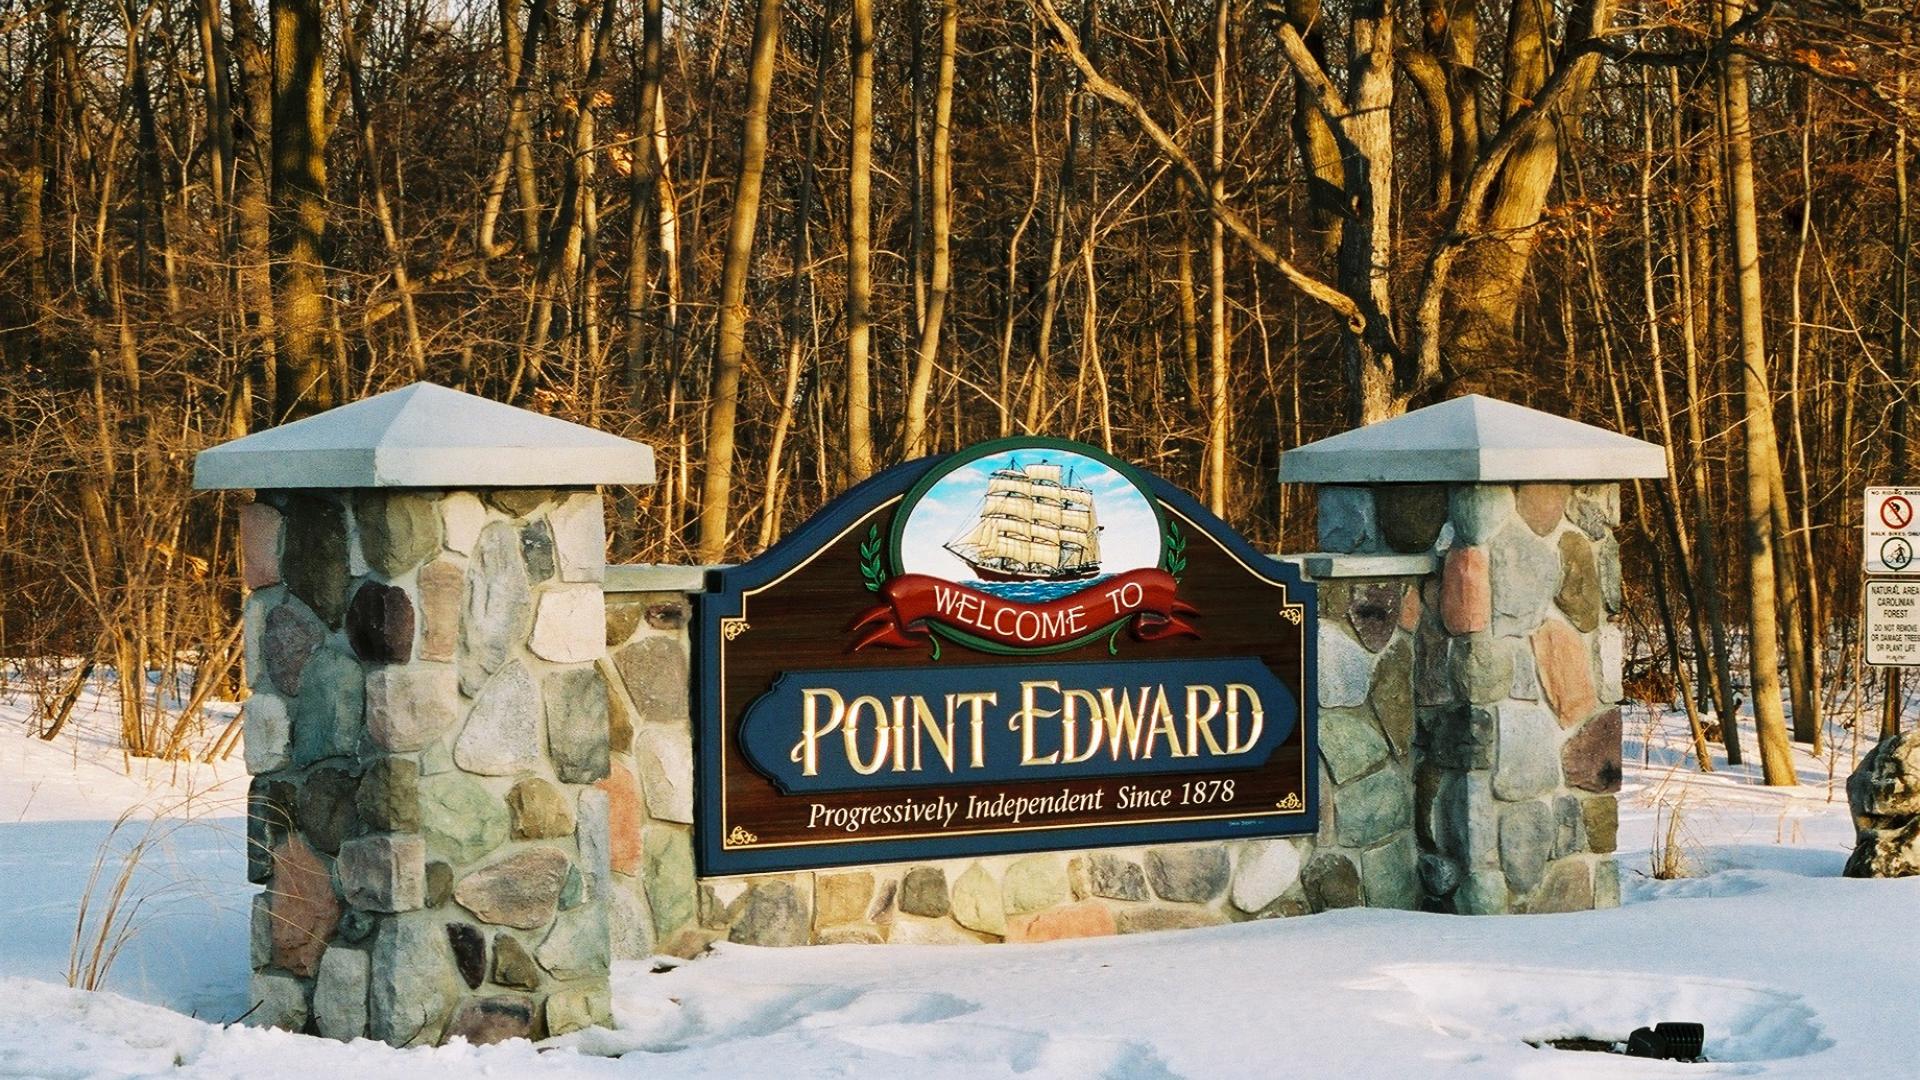 Point Edward welcome sign. The sign has a a large sailboat over the Point Edward wording.